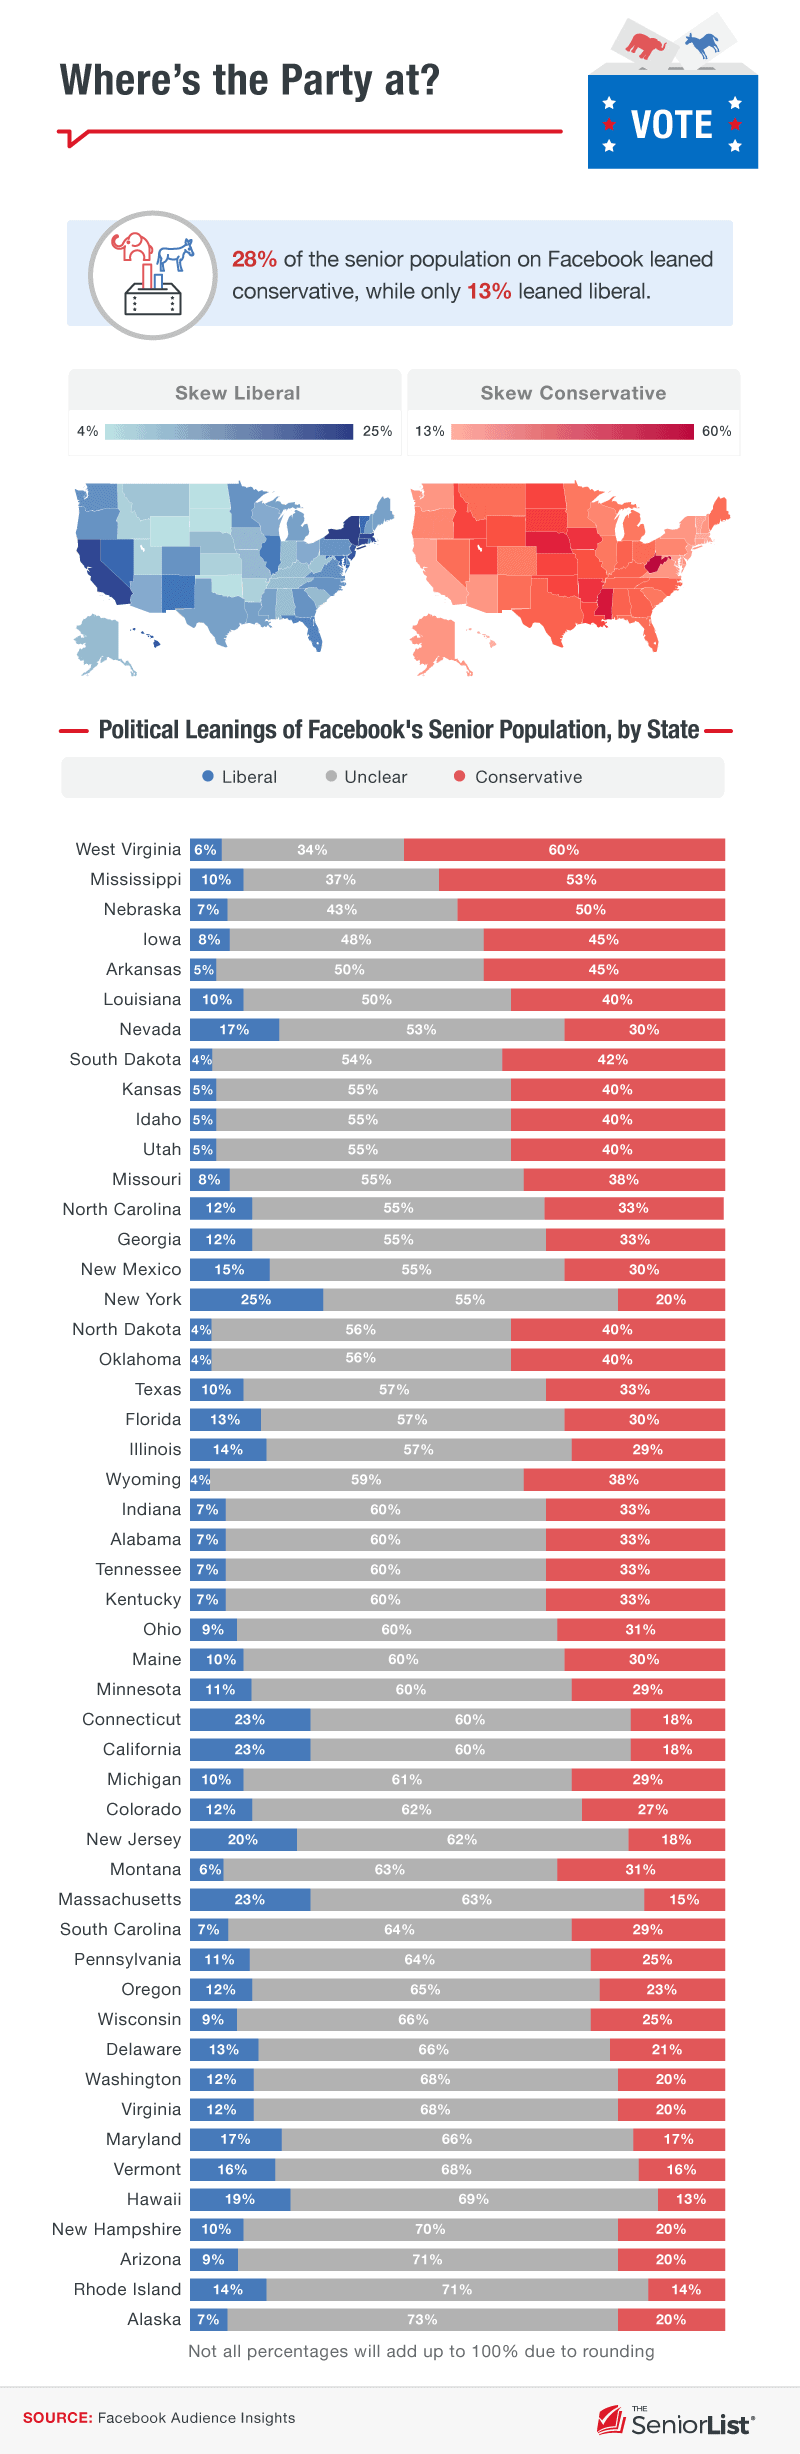 Stacked bar charts showing the political affiliation composition of each state